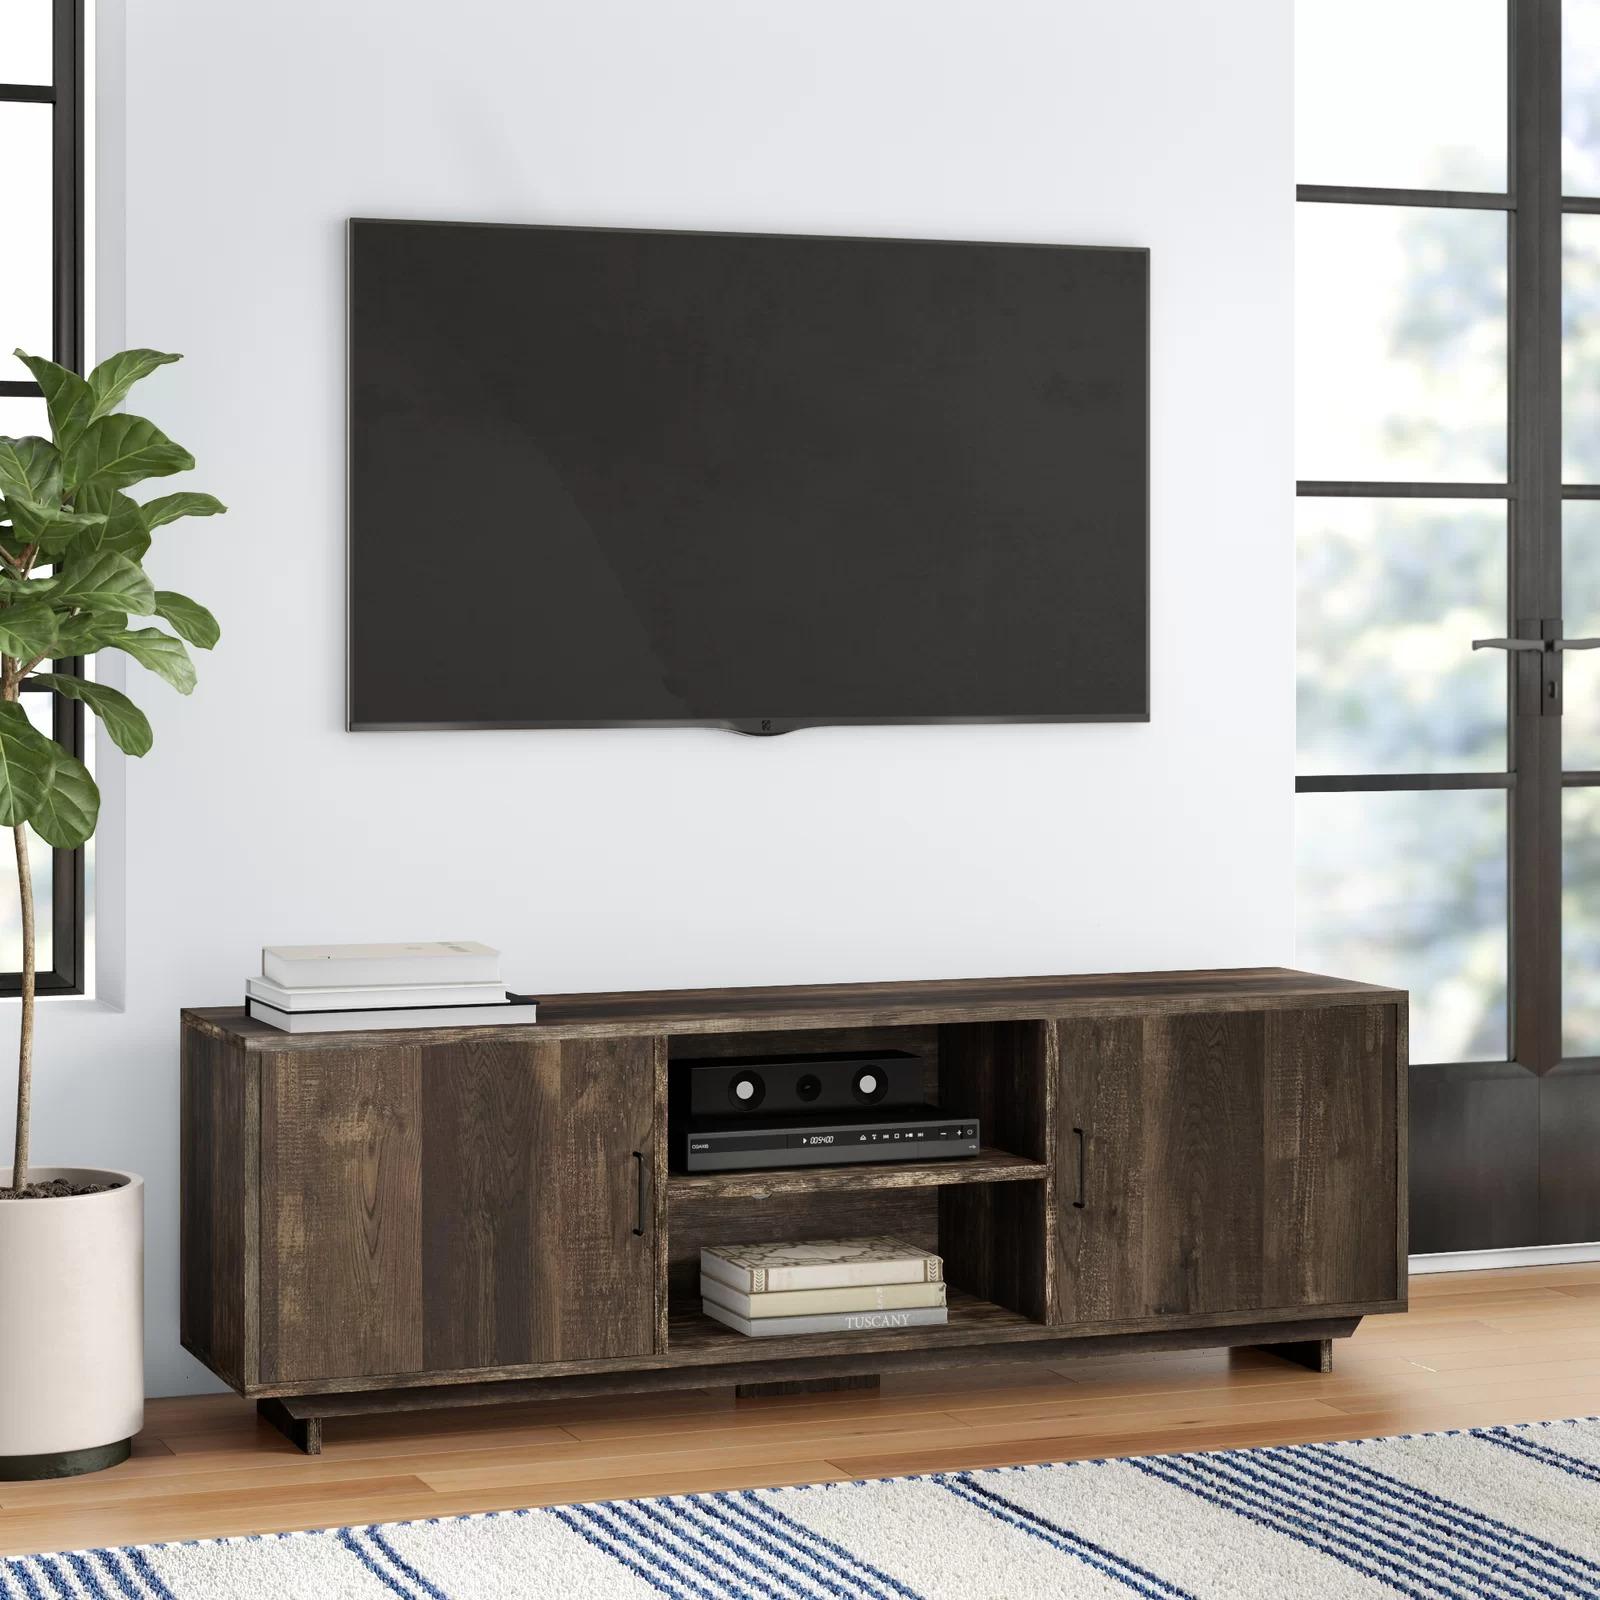 Here's an amazing Black Friday deal you don't want to miss!  4ce009f1 cheriton tv stand for tvs up to